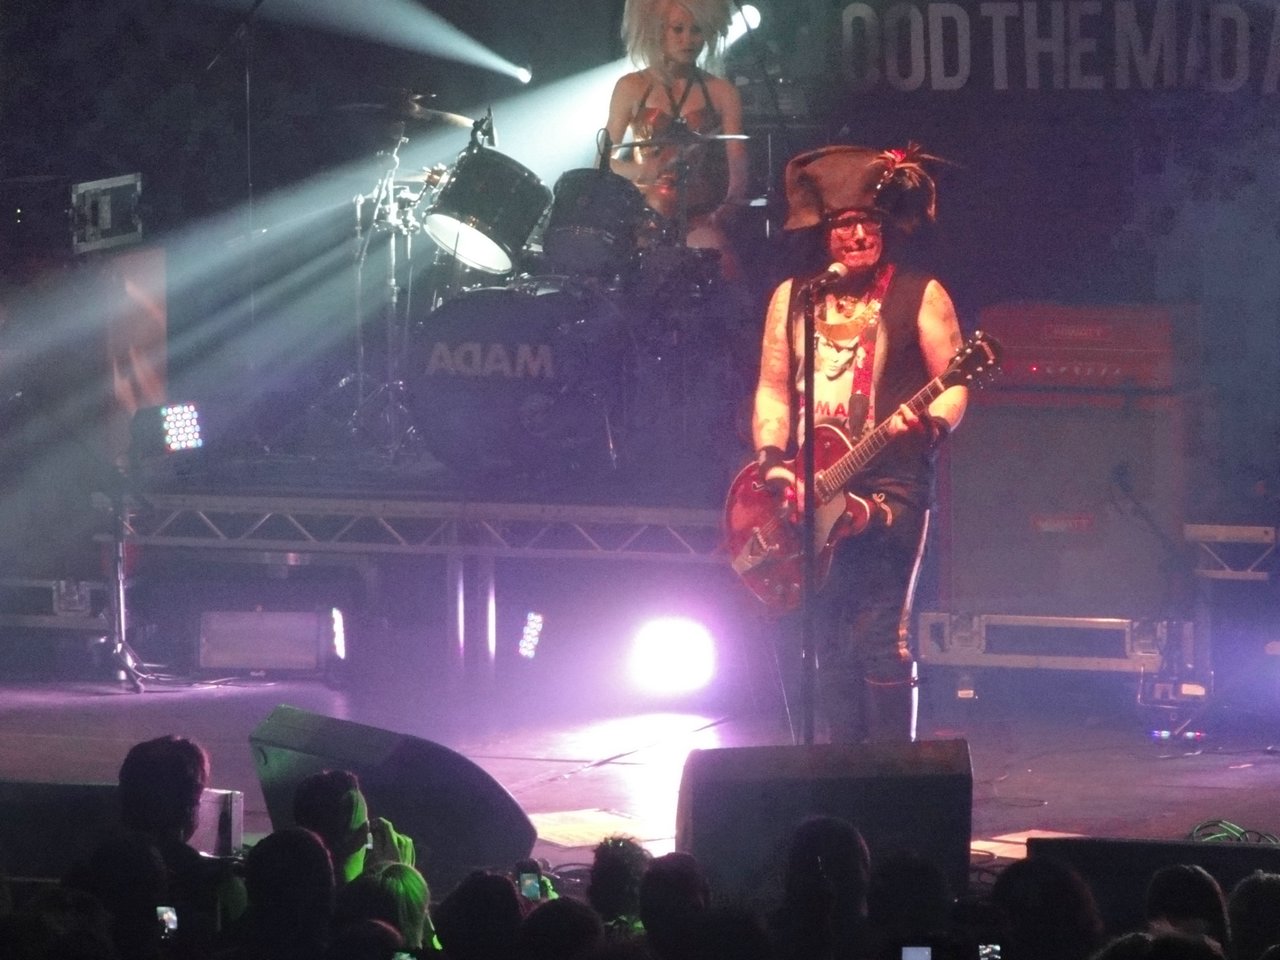 33 Adam Ant at the Roundhouse.jpg